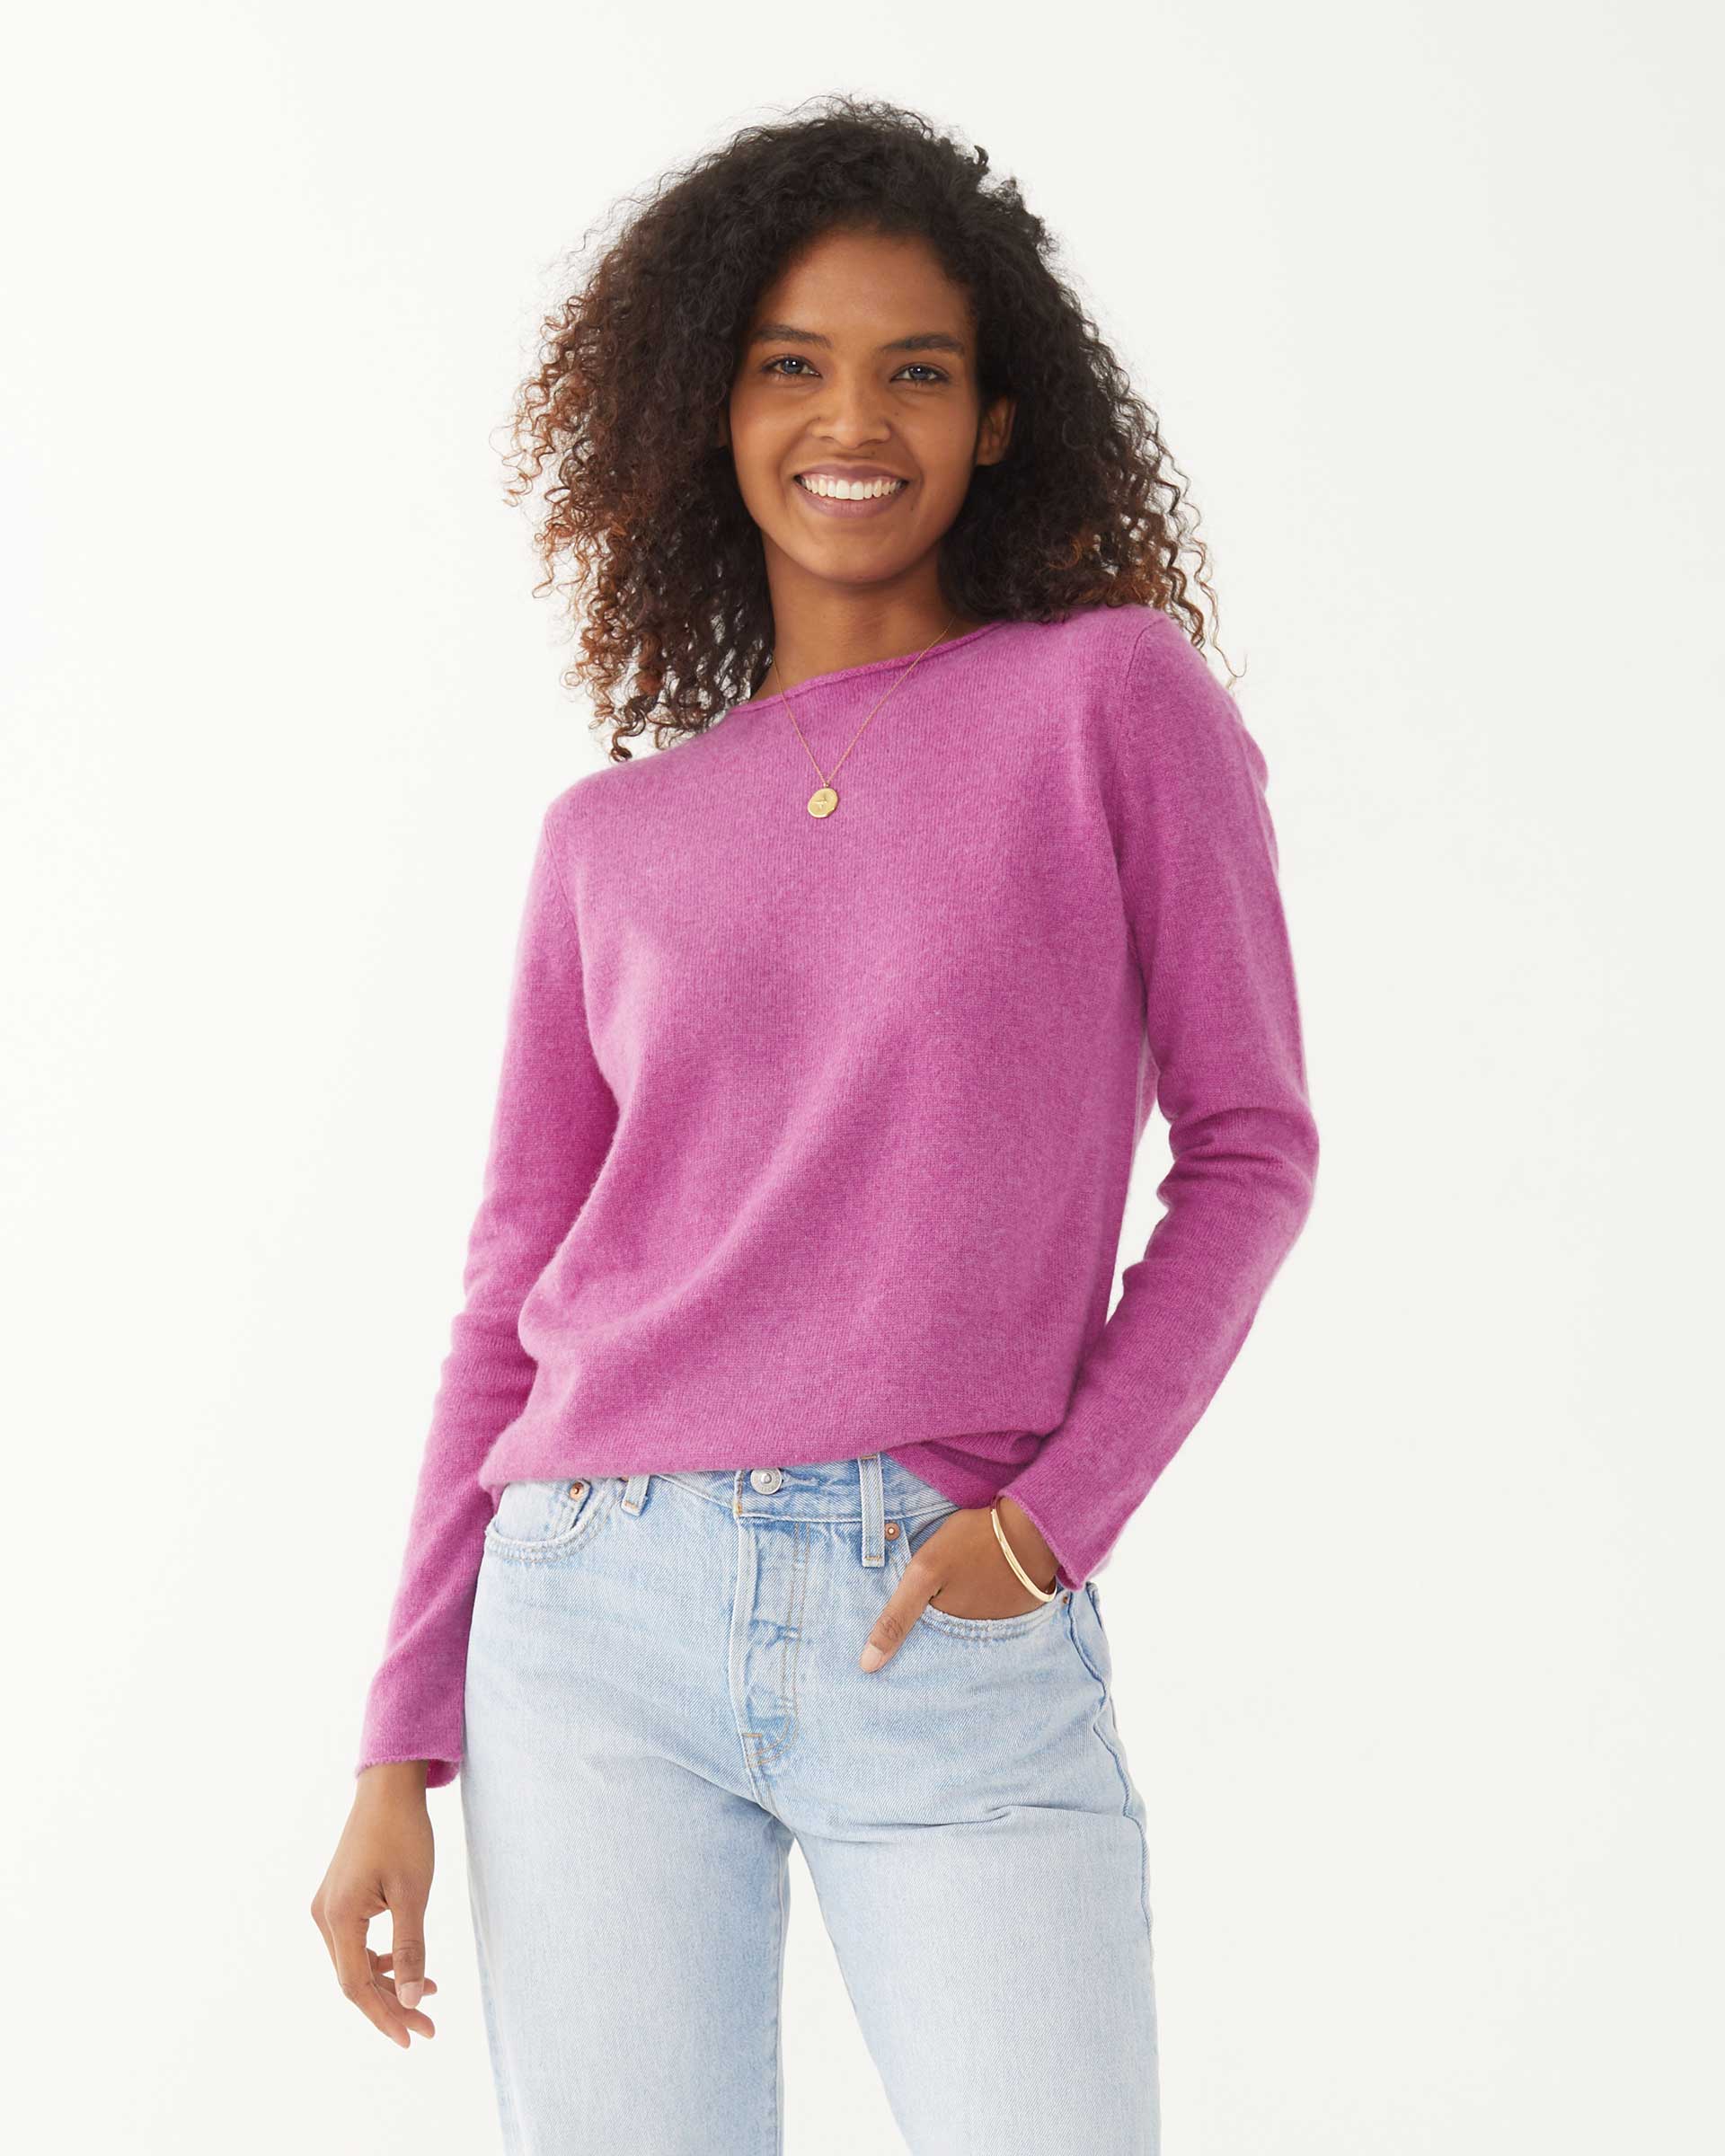 female wearing purple fitted cashmere sweater with a crewneck on a white background